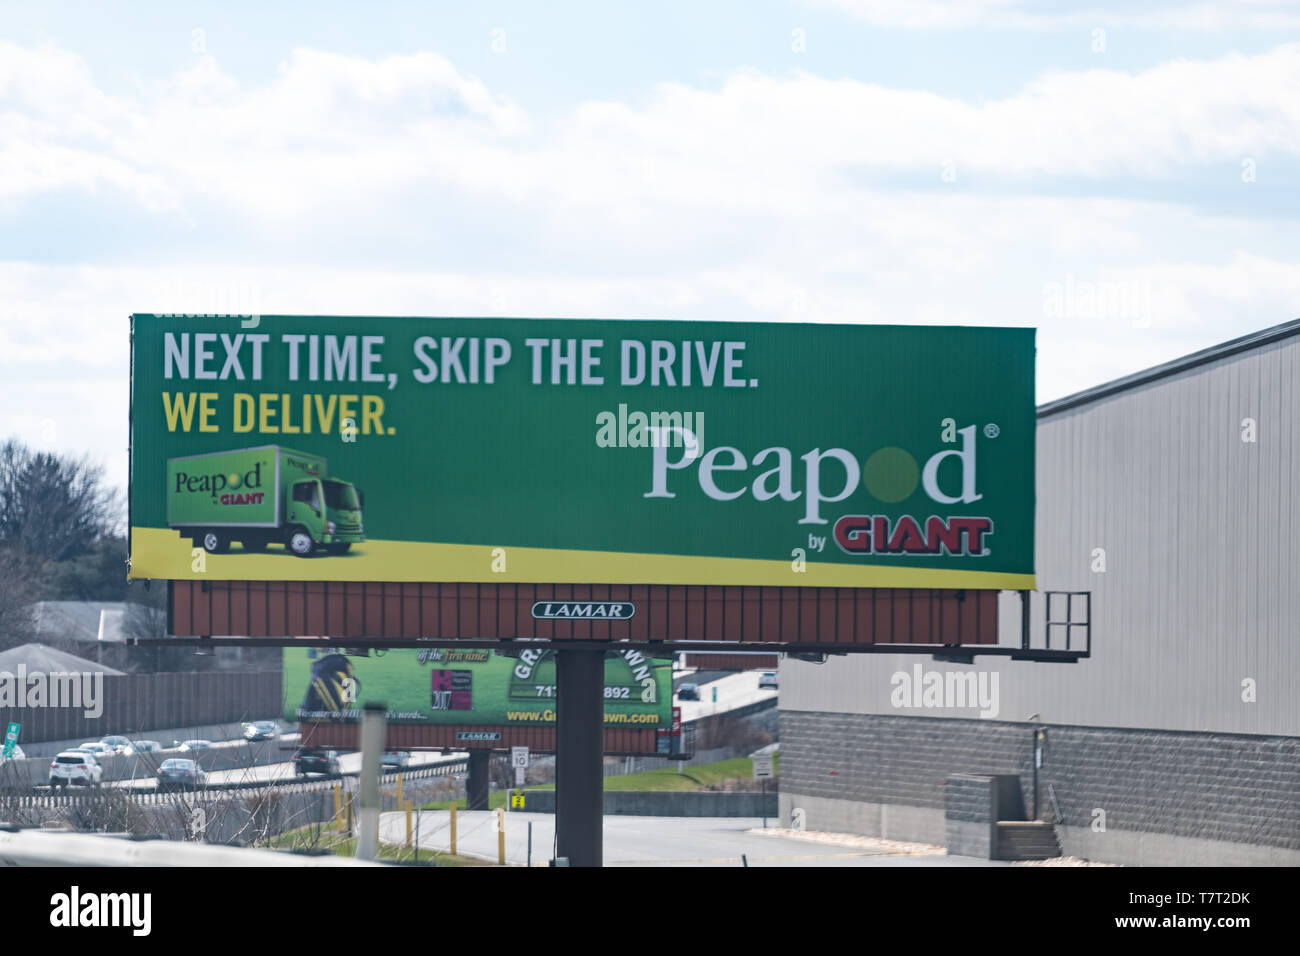 Harrisburg, USA - April 8, 2018: Billboard advertisement advertising Peapod by Giant grocery delivery by truck to home in Pennsylvania Stock Photo